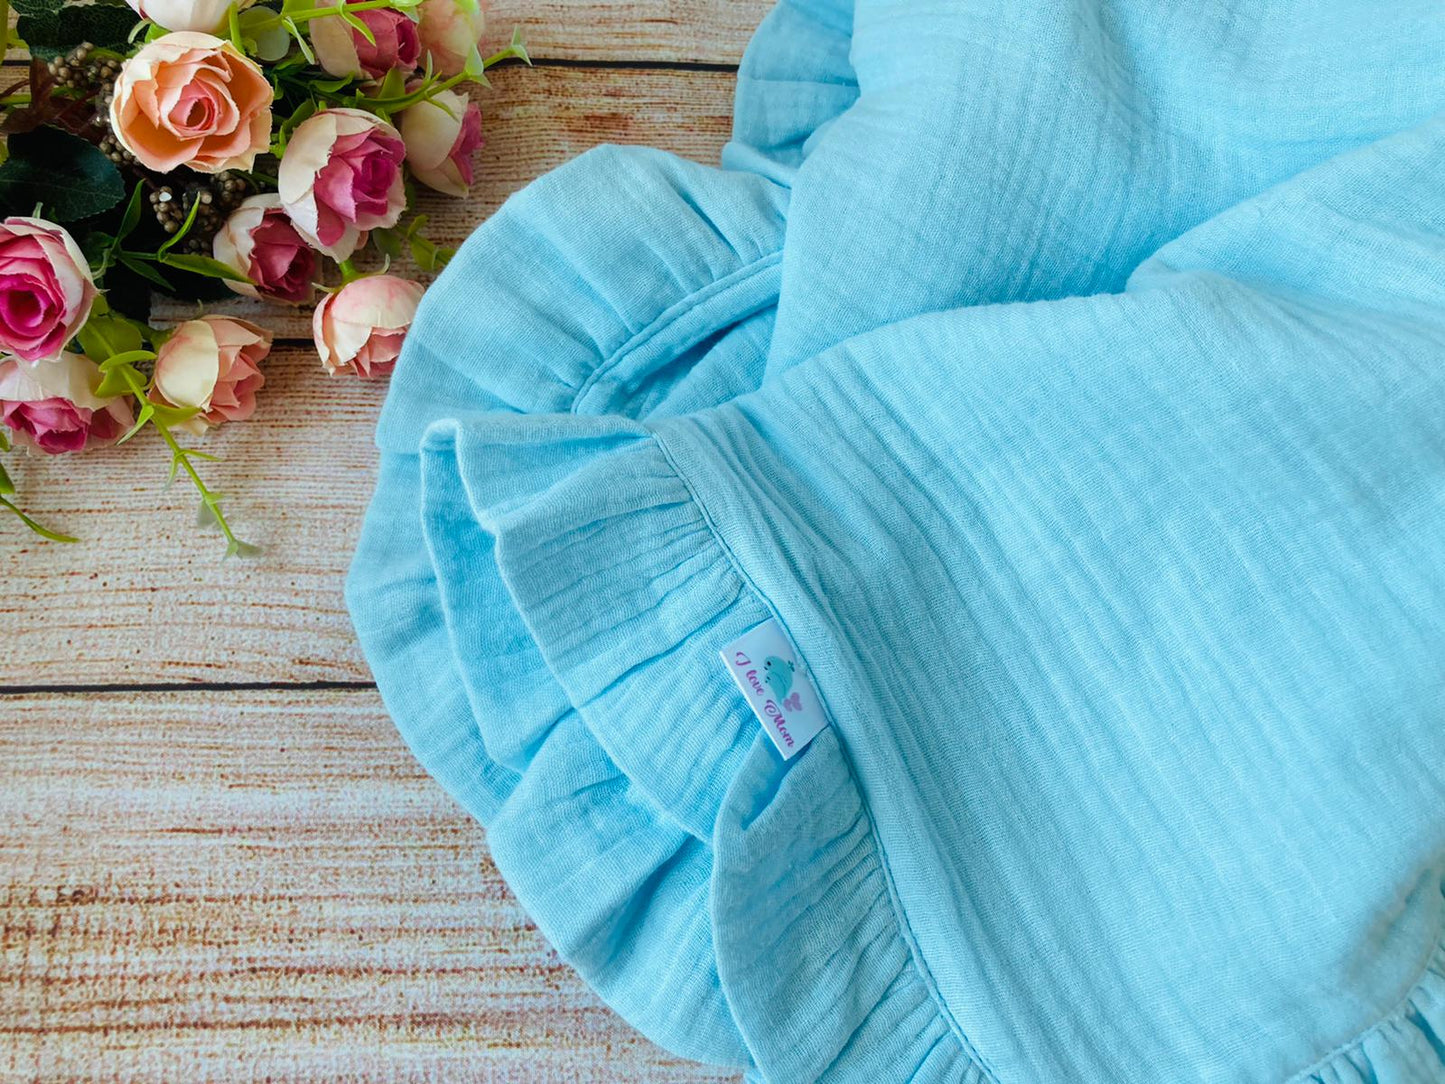 2 layer Muslin baby blanket with ruffles - Light blue